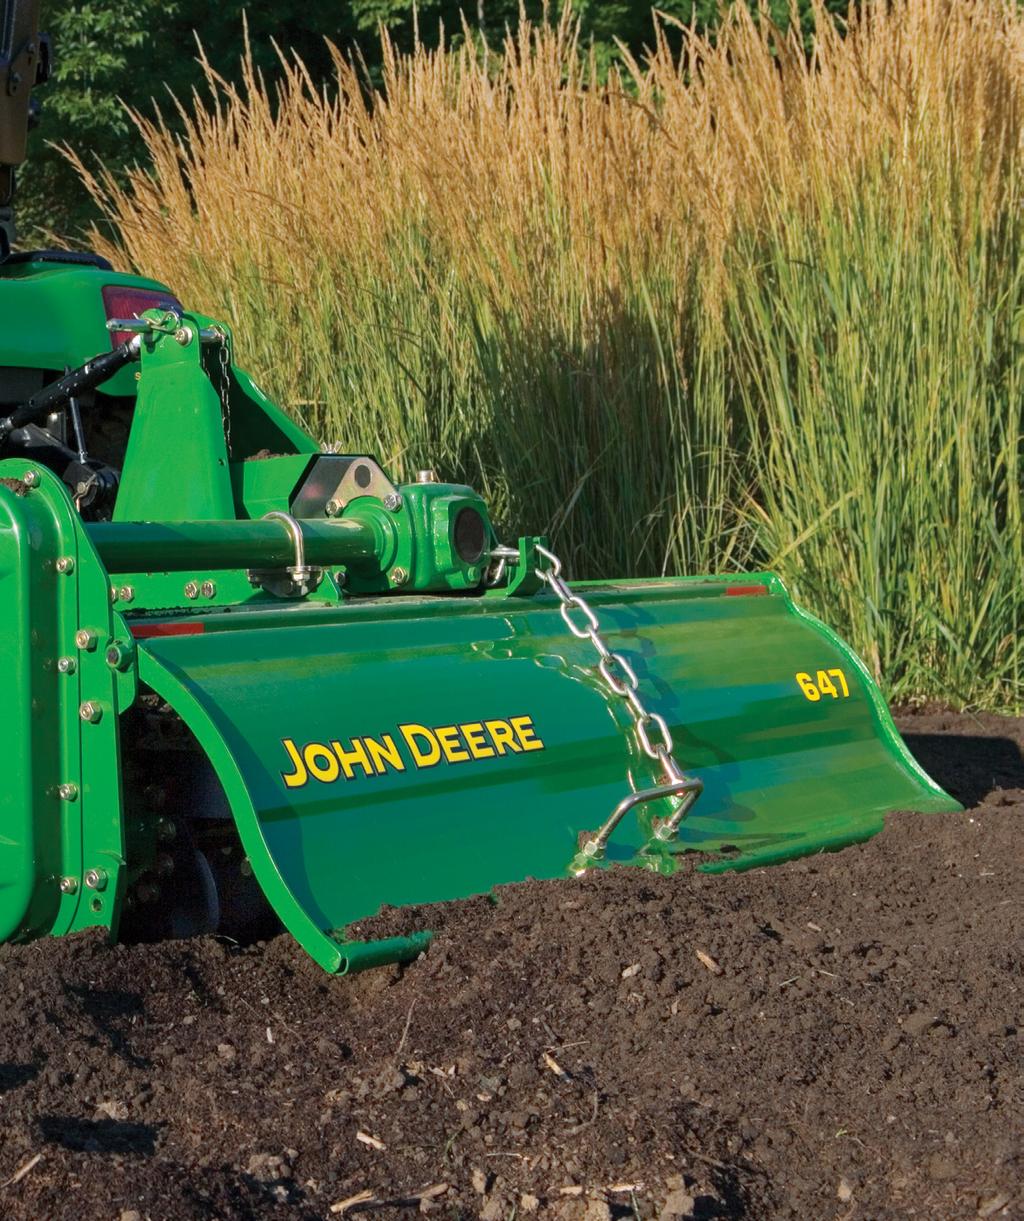 You already know about the quality of John Deere riding lawn equipment.